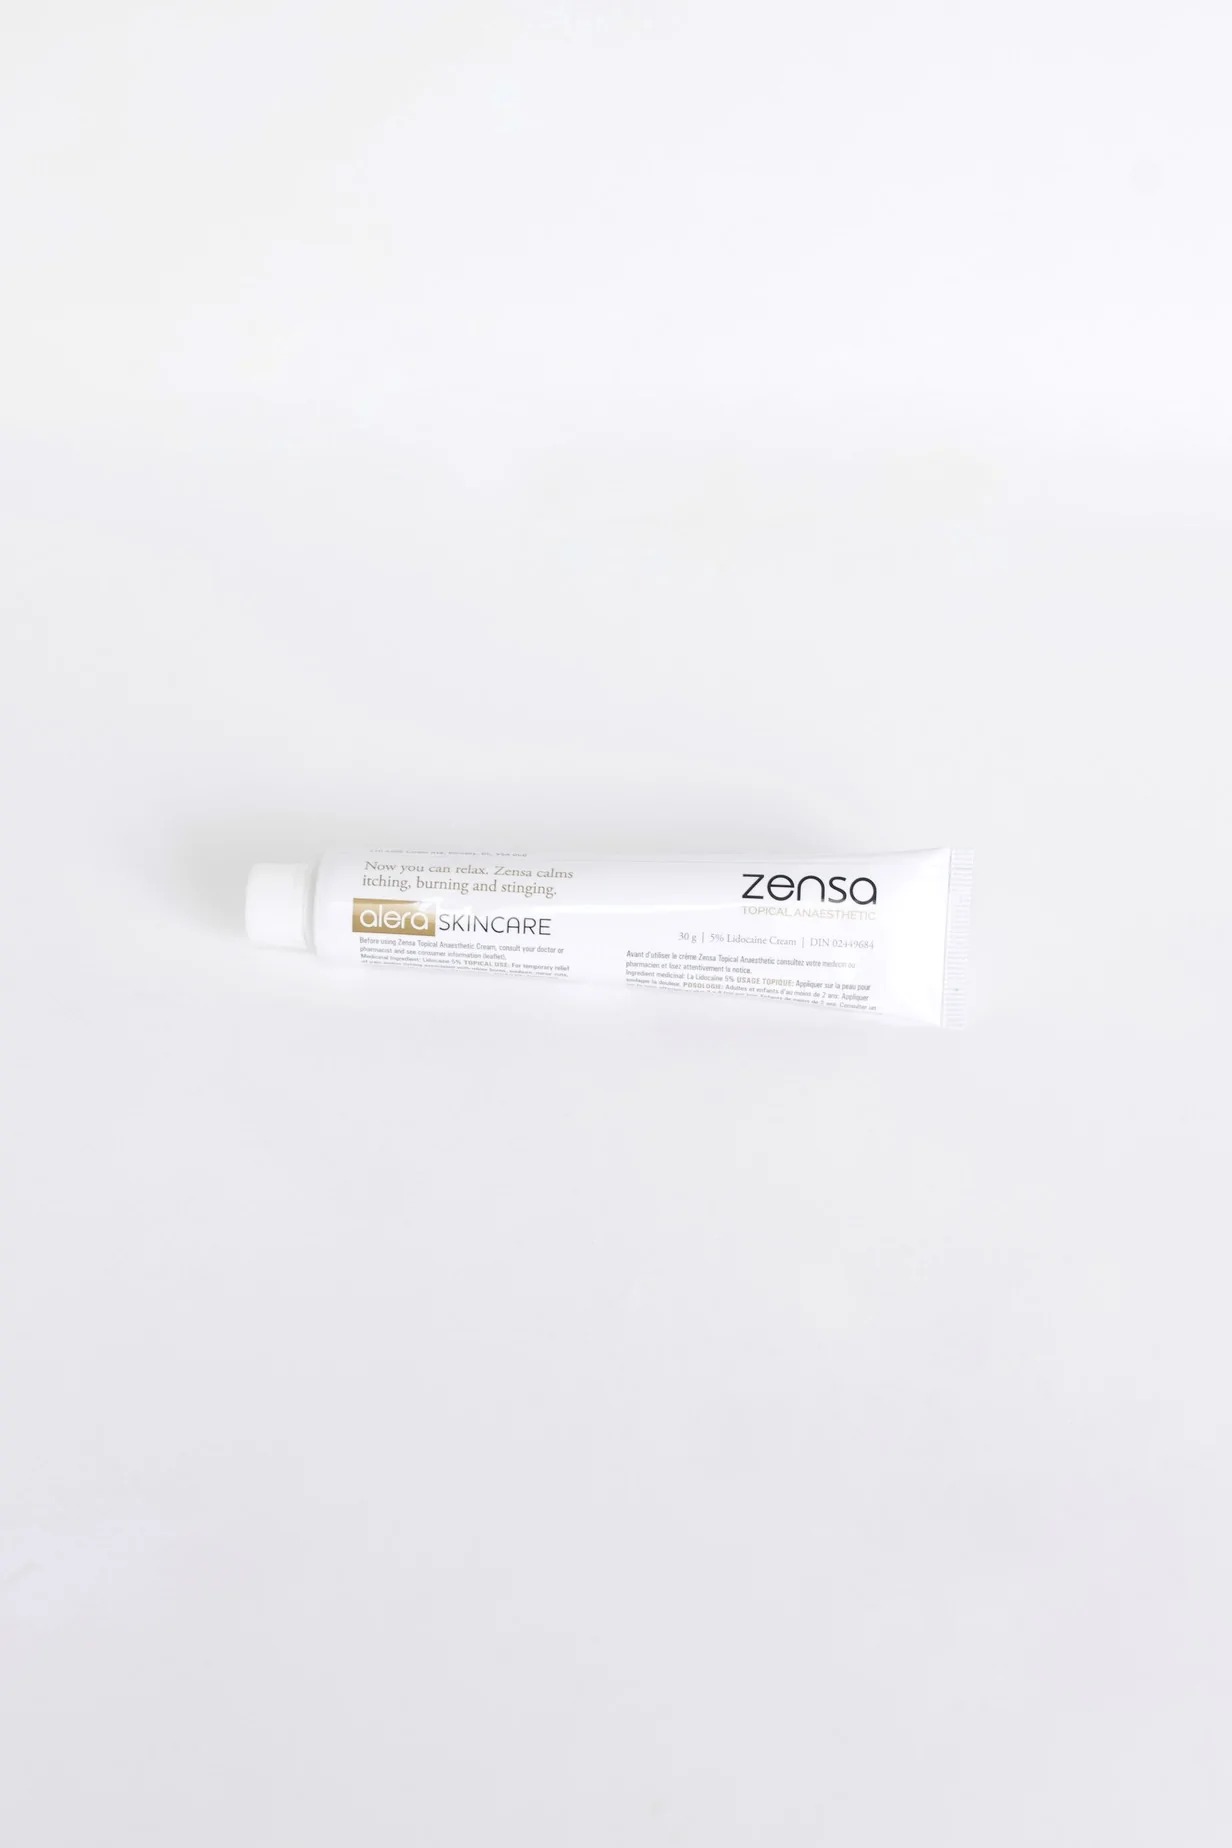 Zensa Numbing Cream- Why Do People Love This Topical Anesthetic 